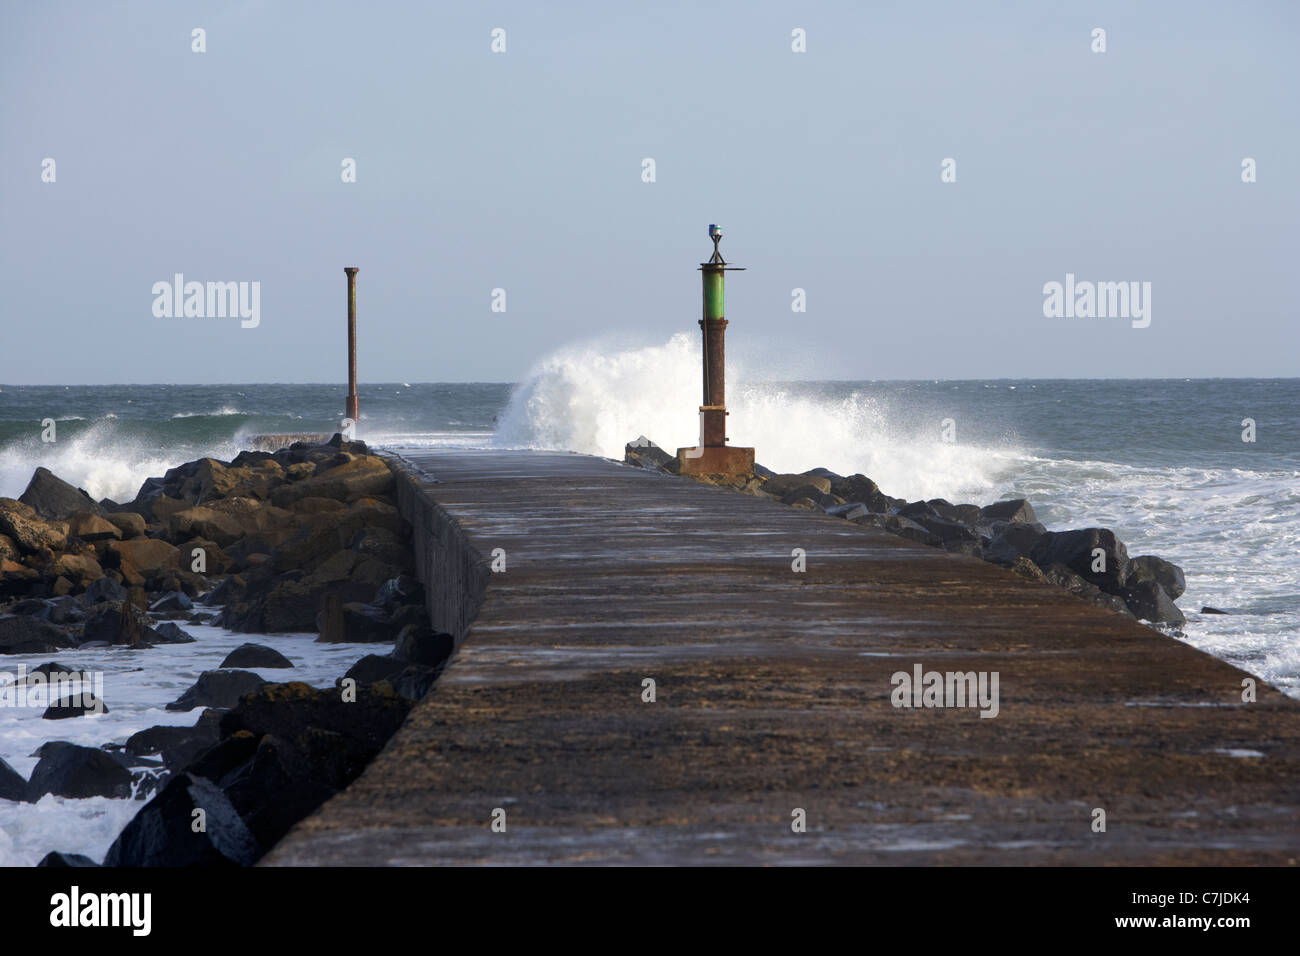 waves breaking on pier bann mouth county derry londonderry northern ireland Stock Photo